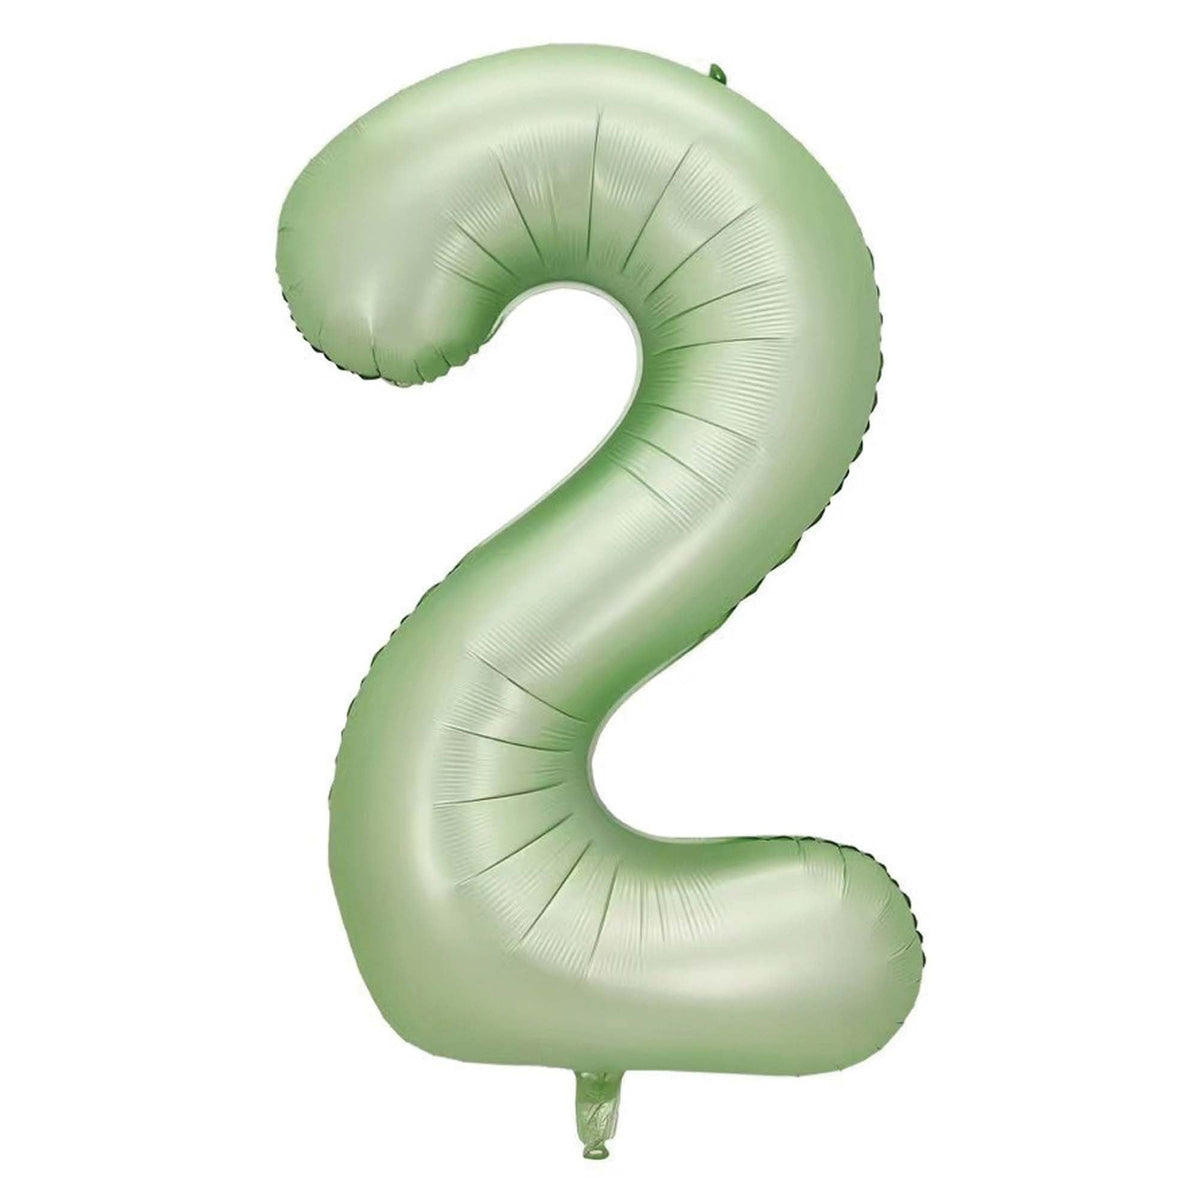 BOOMBA INTERNATIONAL TRADING CO,. LTD Balloons Eucalyptus Matte Green Number 2 Supershape Foil Balloon, 40 Inches, 1 Count 810077659861